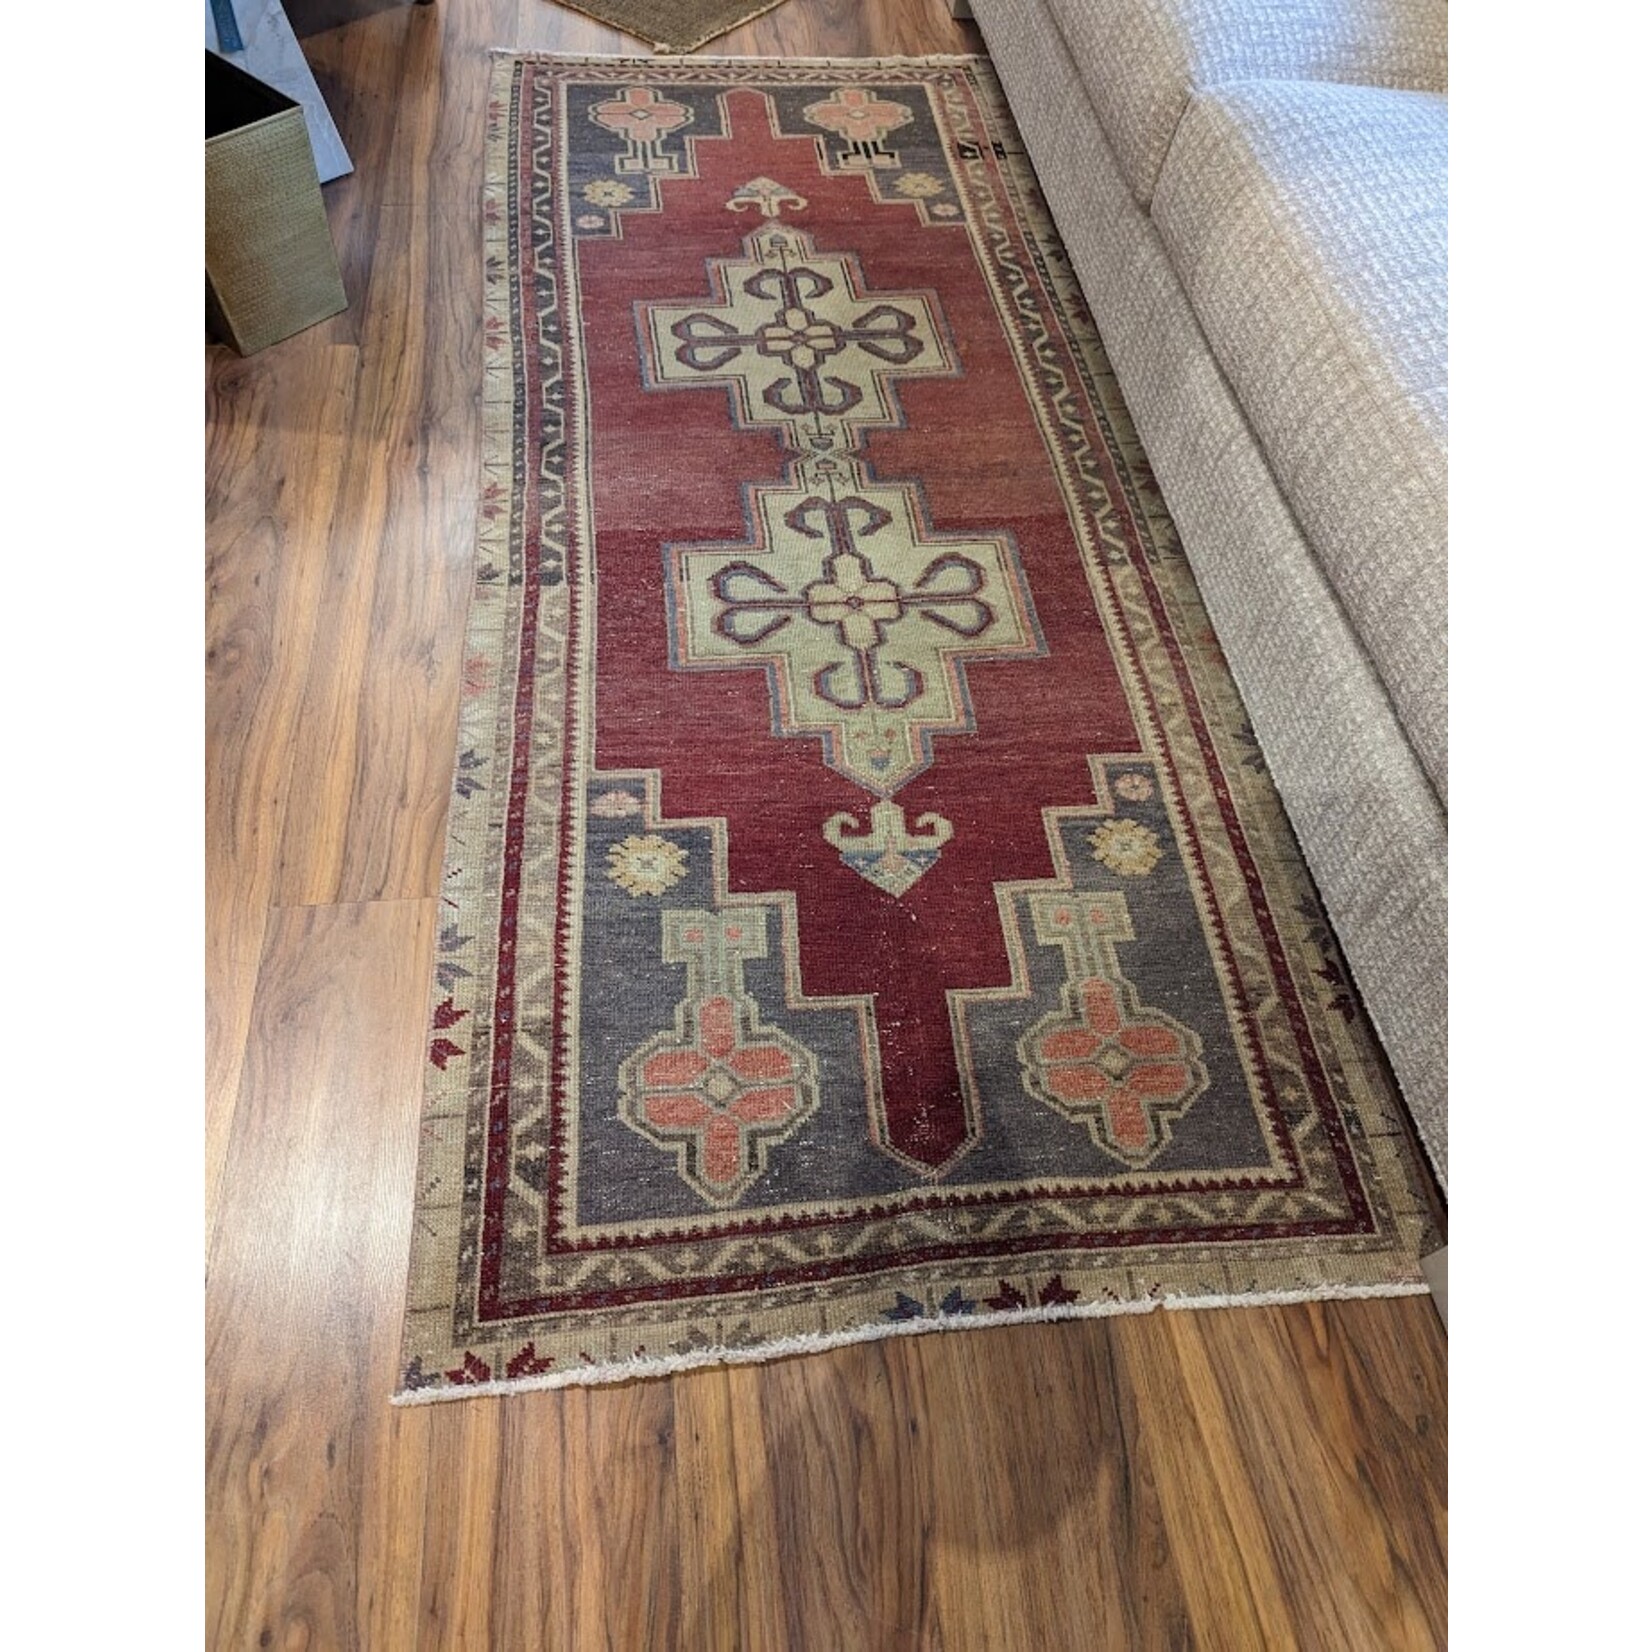 Surya Hand Knotted Runner Rug 3'x7'4"